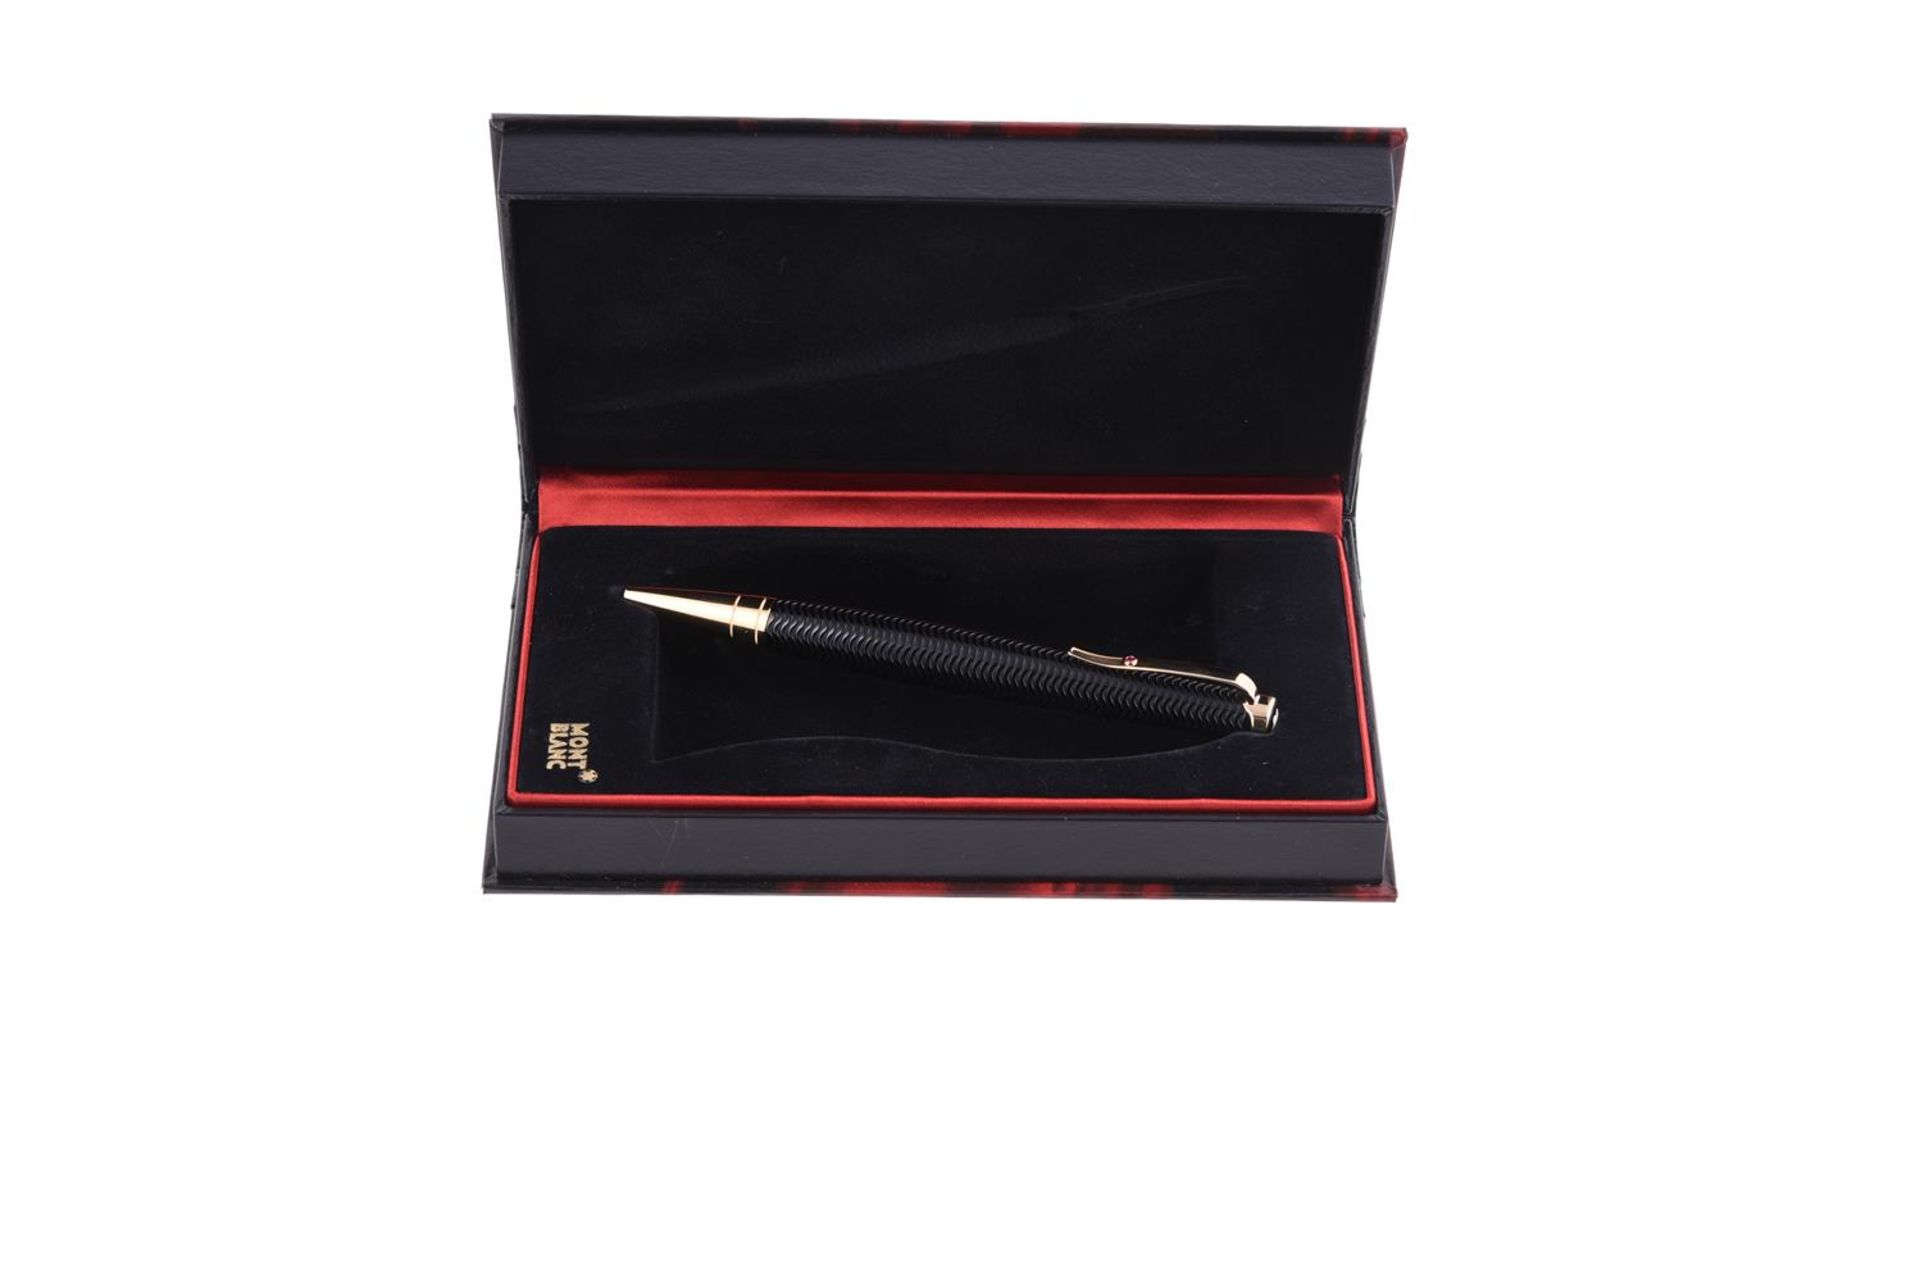 MONTBLANC, WRITERS EDITION, VIRGINIA WOOLF, A LIMITED EDITION BALLPOINT PEN - Image 2 of 2